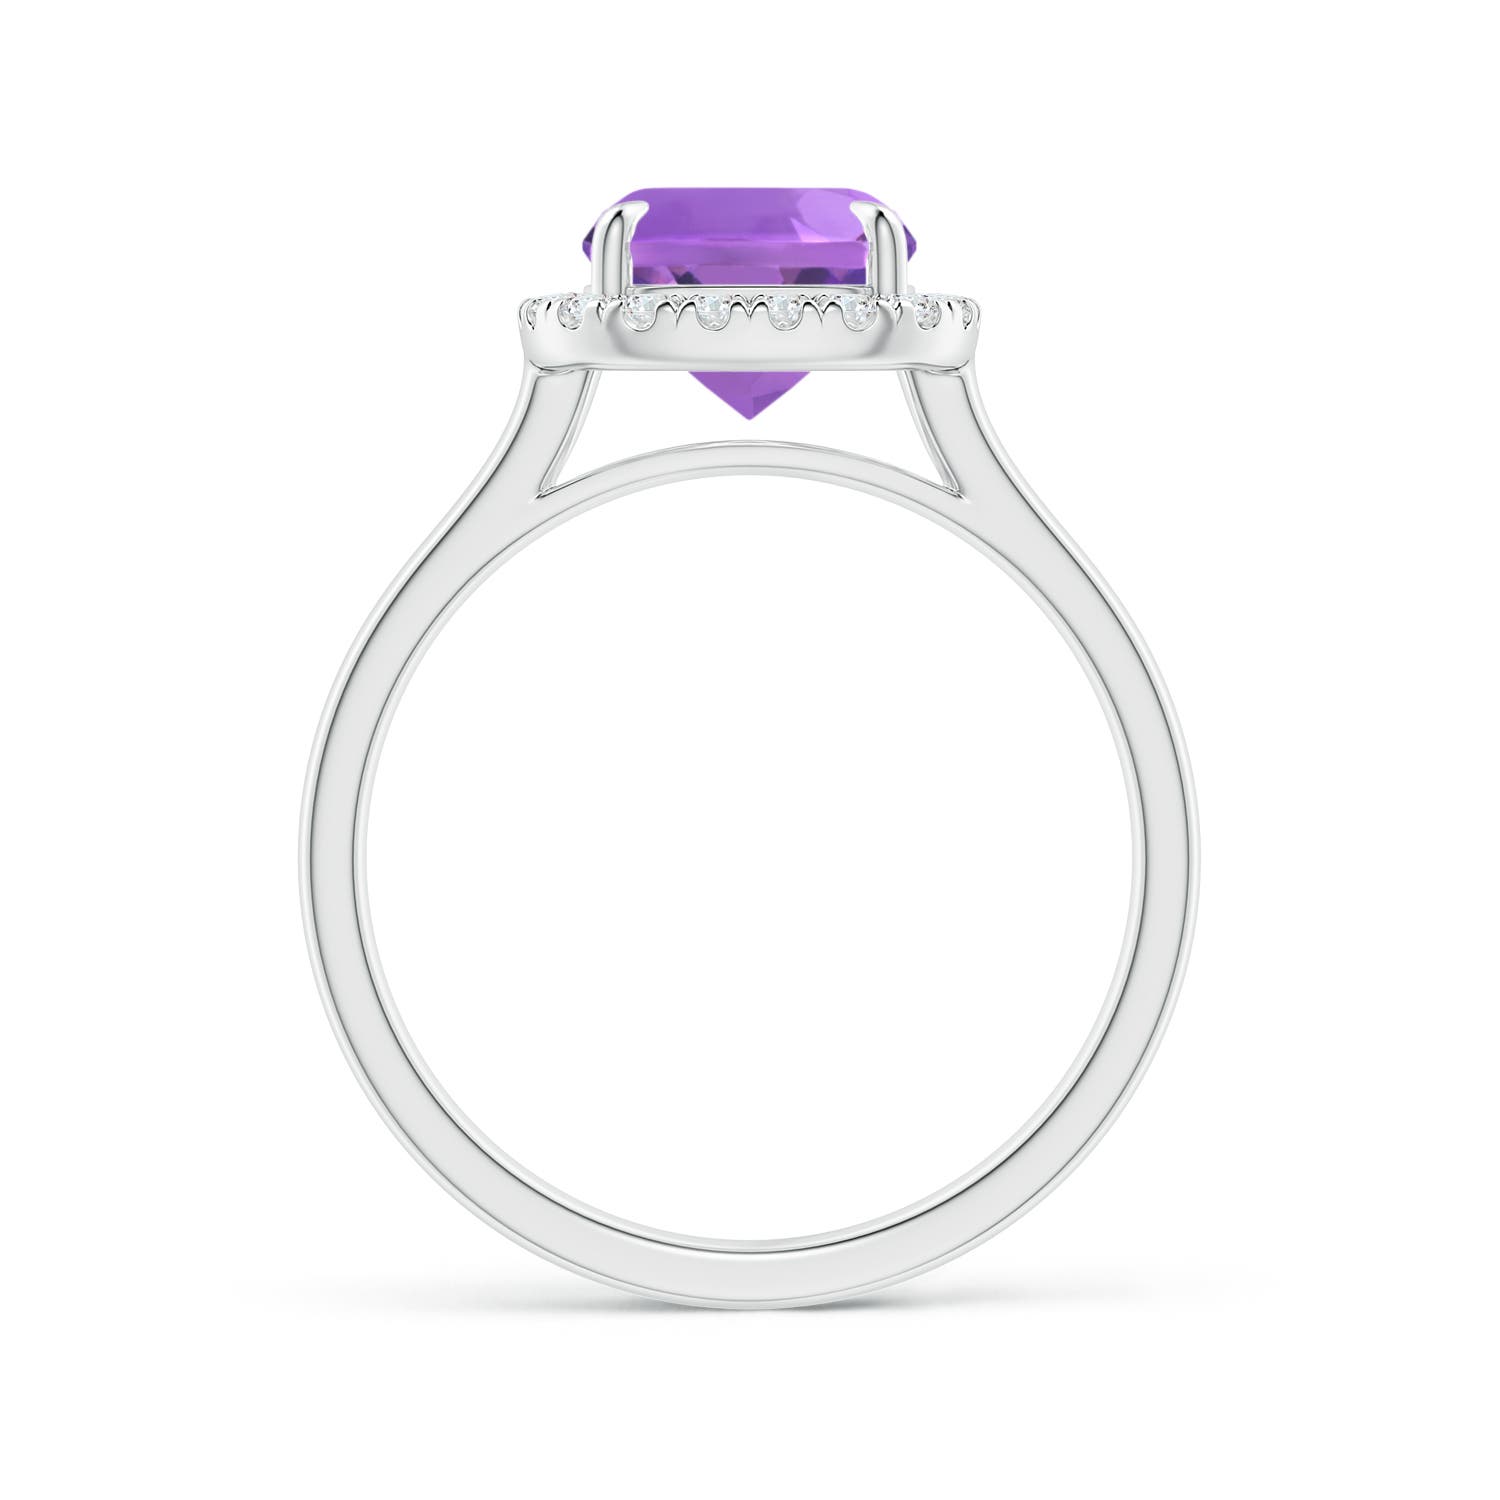 AA - Amethyst / 2.22 CT / 14 KT White Gold